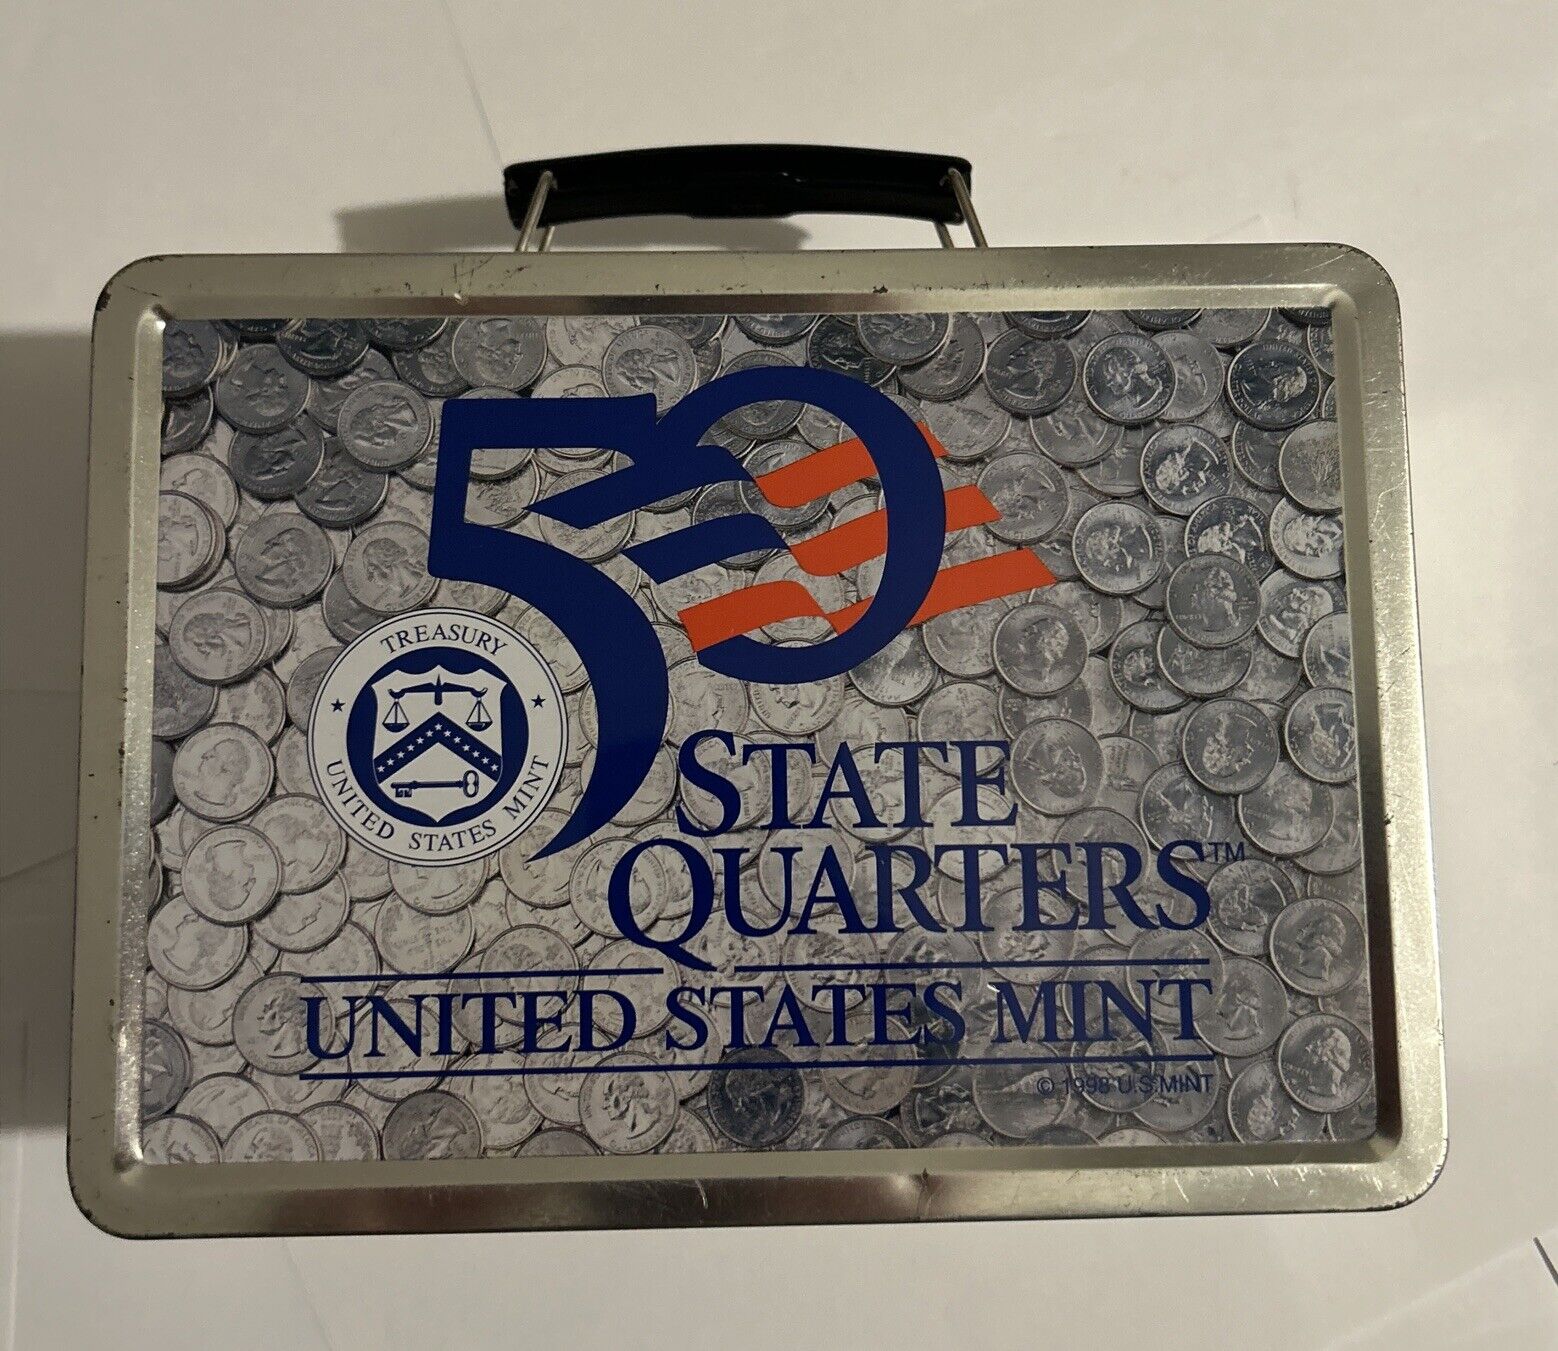 VTG 50 STATE QUARTERS US MINT METAL LUNCHBOX - GOOD CONDITION + 